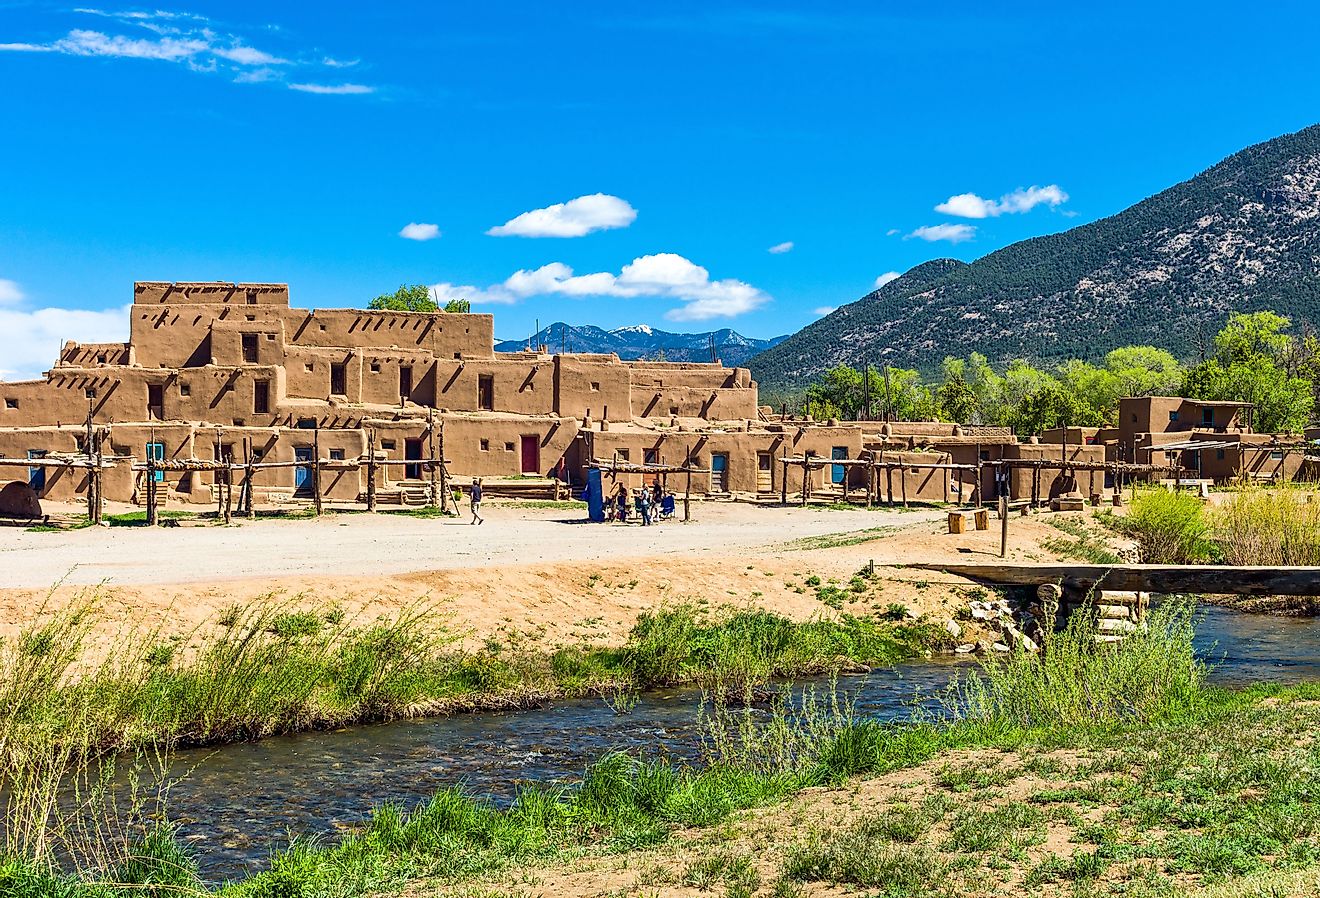 Taos Pueblo with mountains in the background. Image credit Gimas via Shutterstock. 